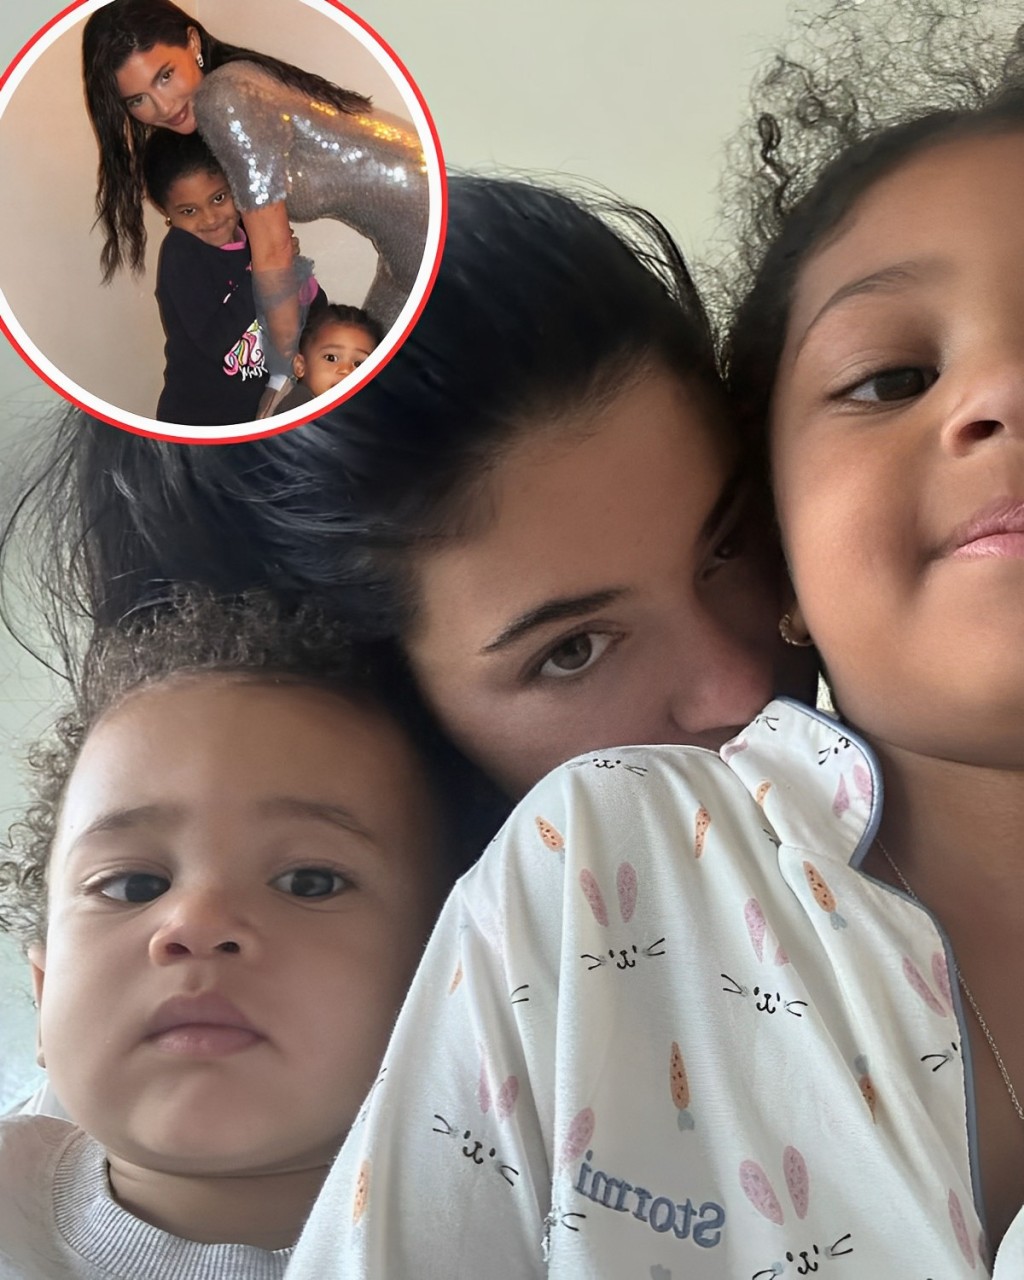 Cover Image for Celebrating Mother’s Day, Kylie Jenner shares adorable photos with daughter Stormi and son Aire.